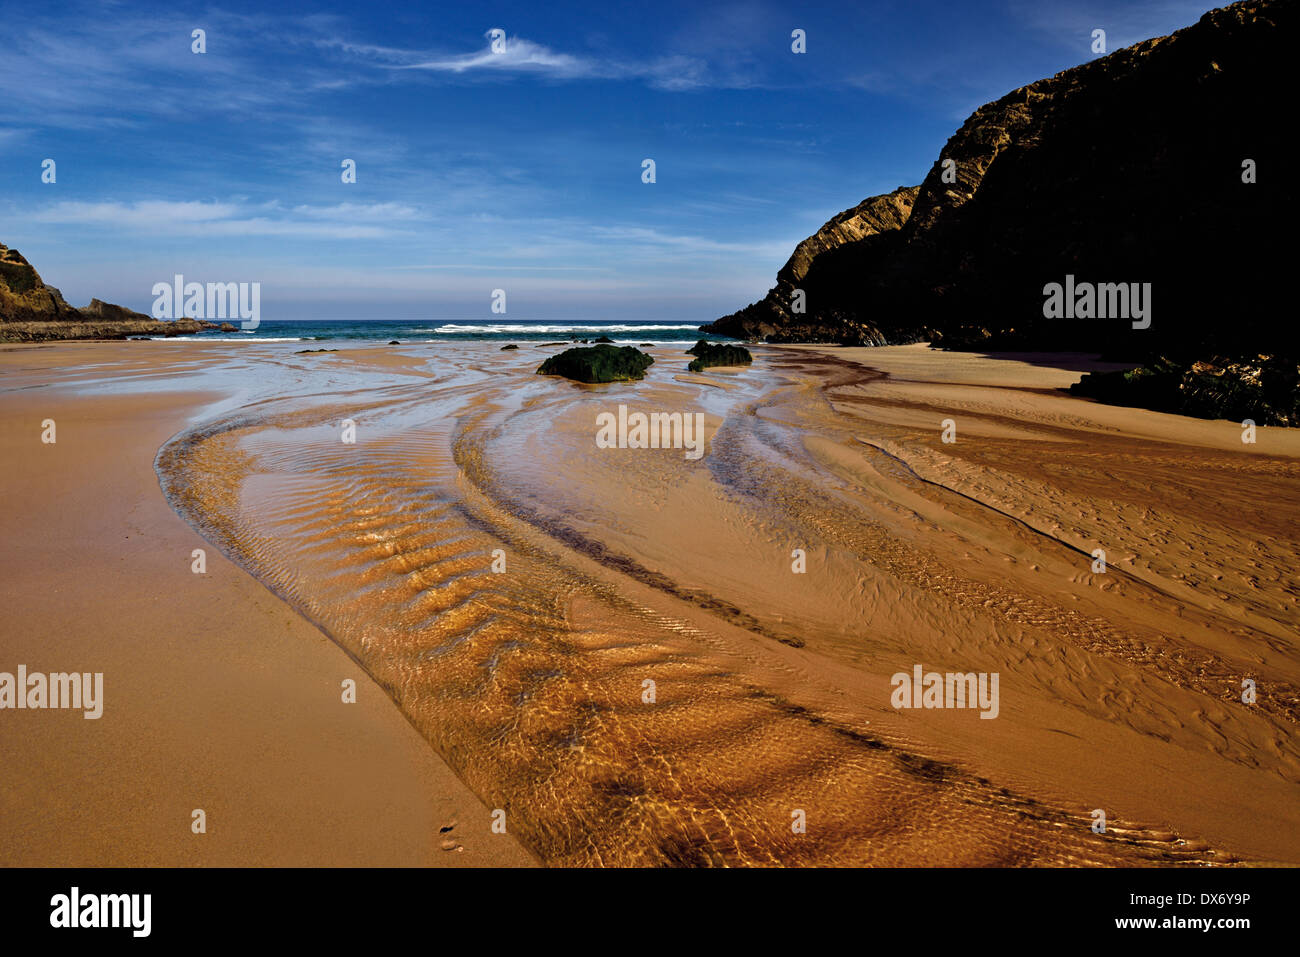 Portugal, Alentejo: Natural beach with wide sand bay and cliffs at low tide Stock Photo